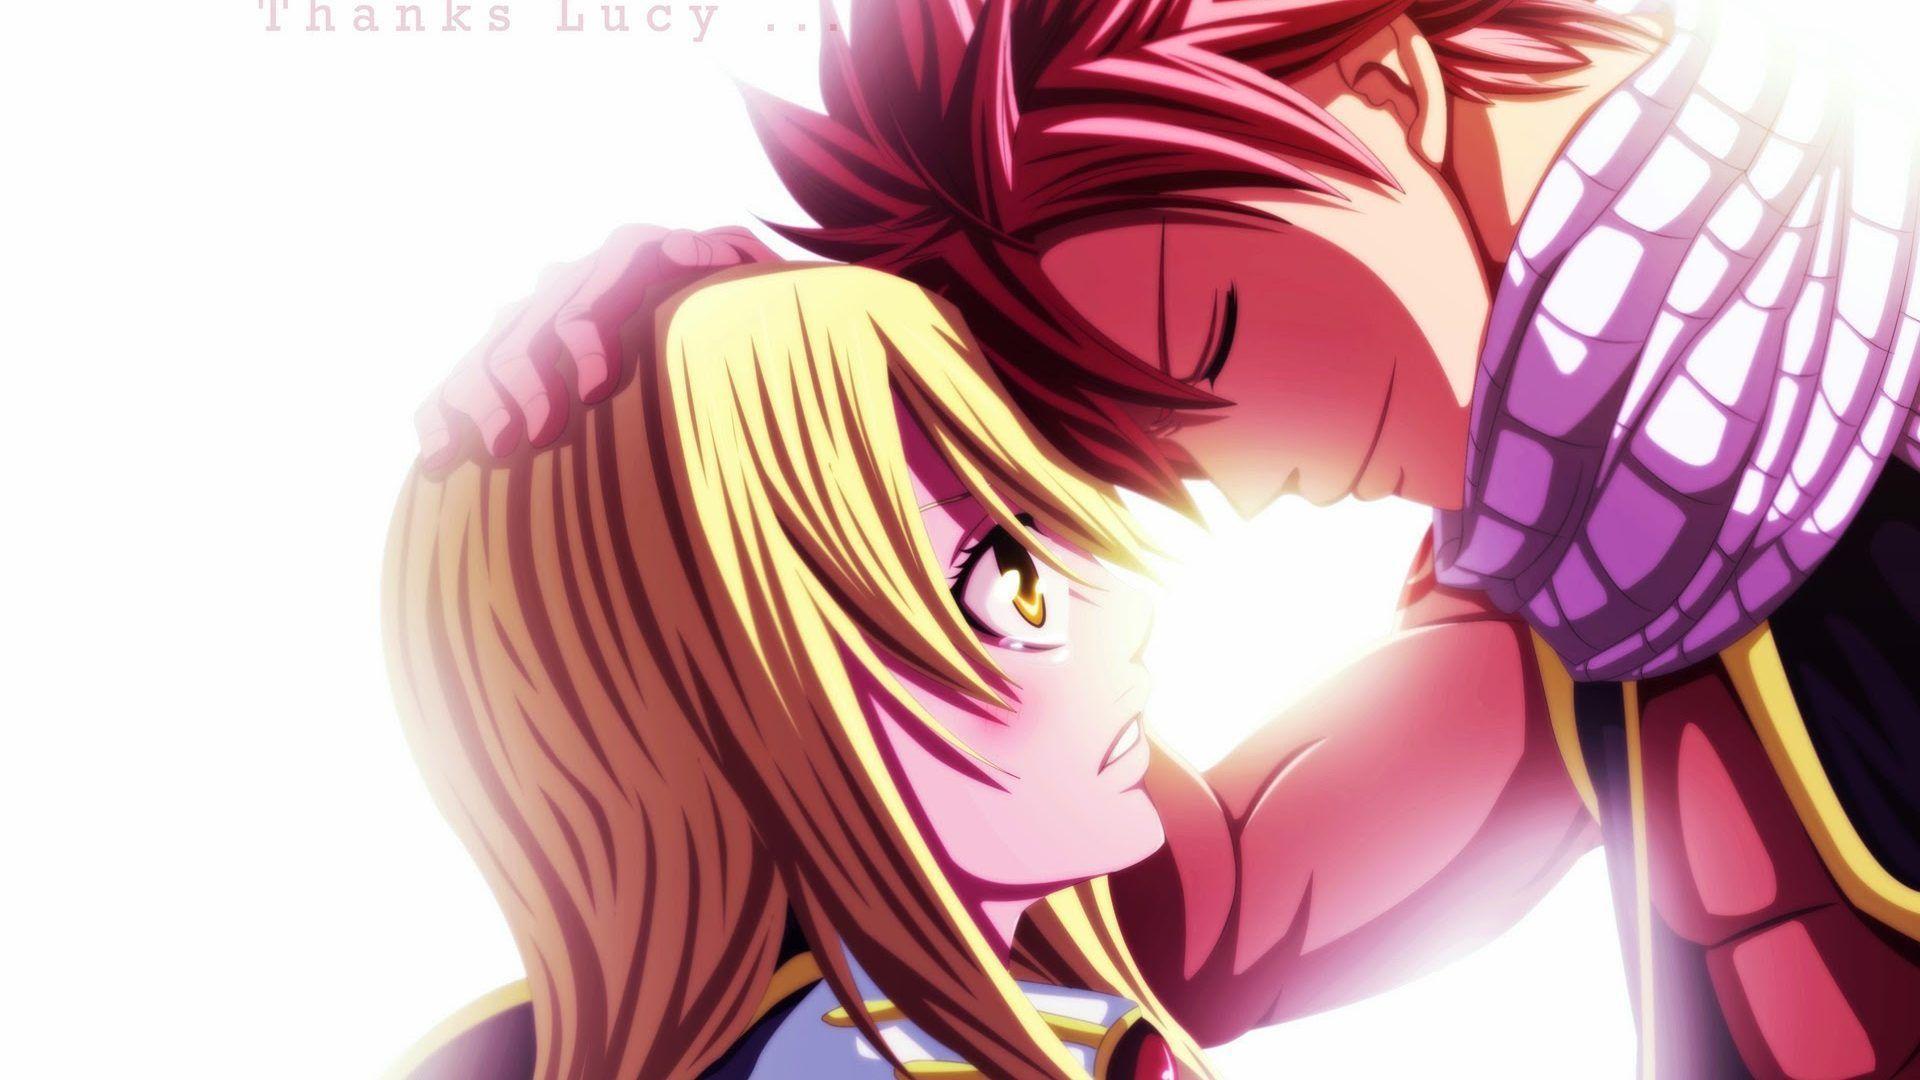 Natsy and Lucy Fairy Tail Anime Couples Wallpaper